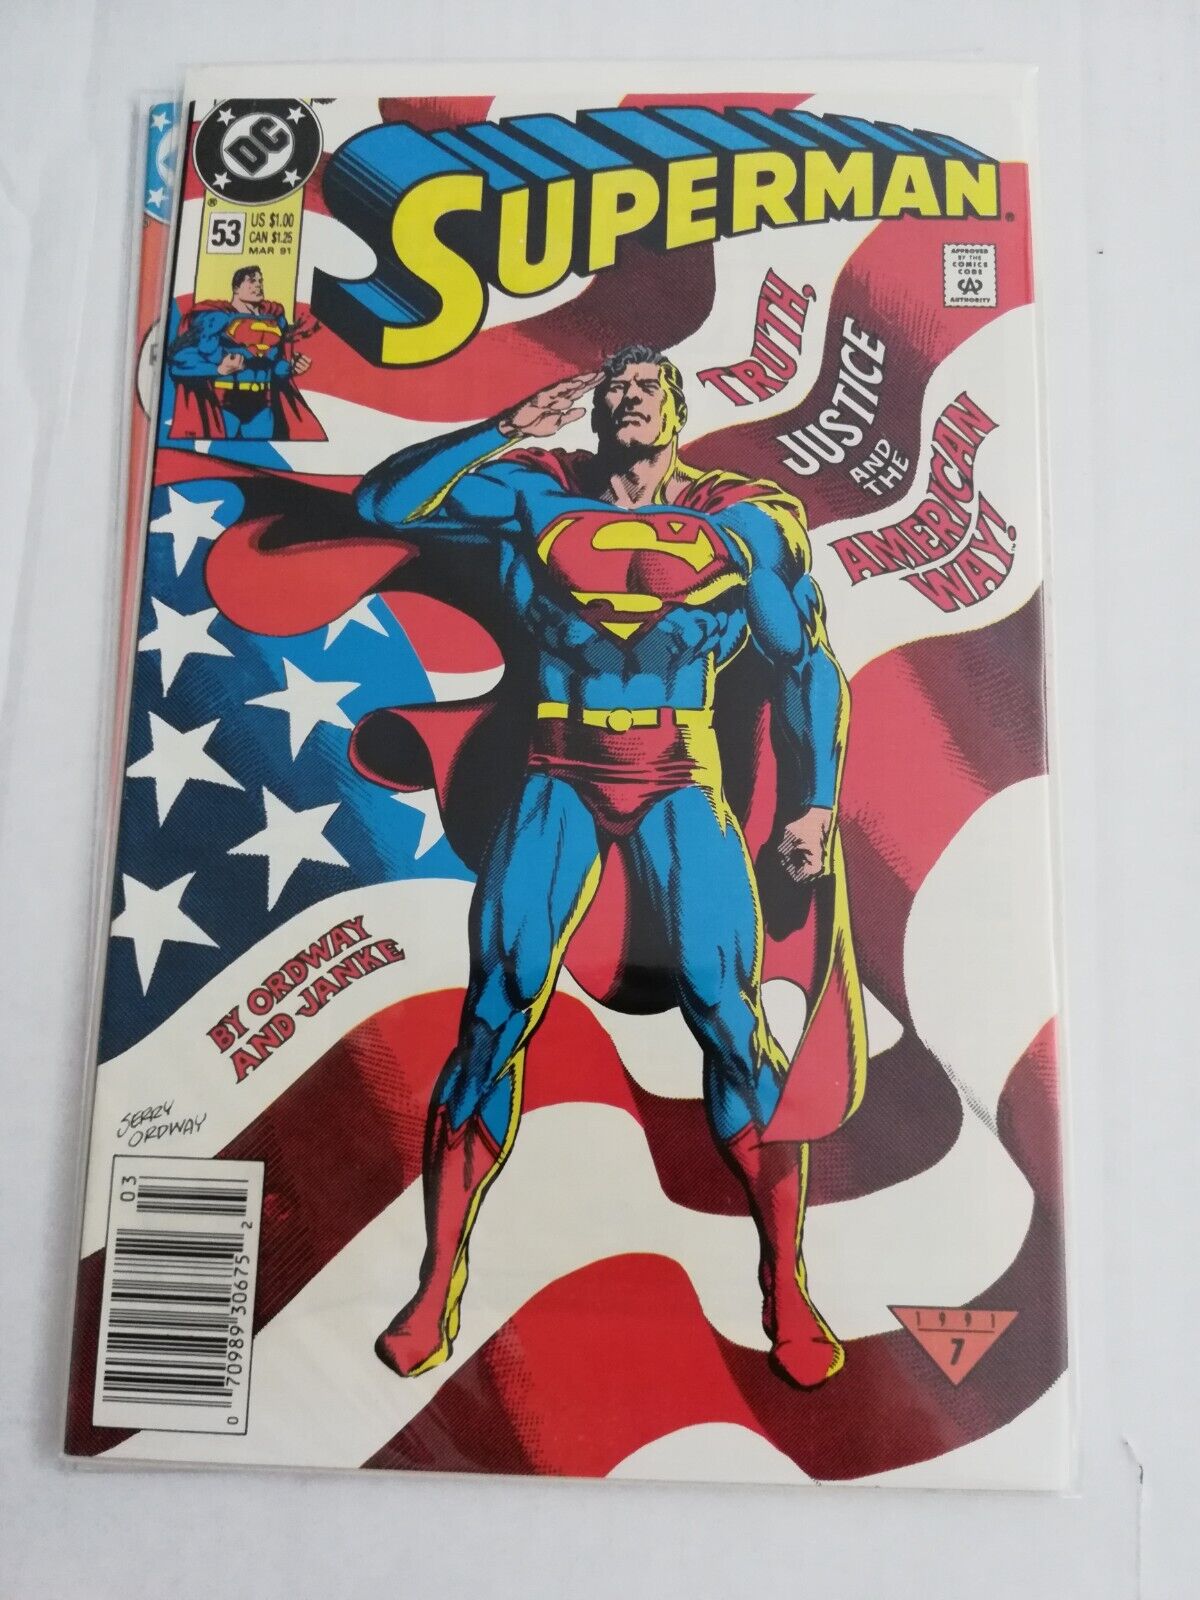 SUPERMAN #53 DC Comics very fine condition Truth Justice American Way Newsstand